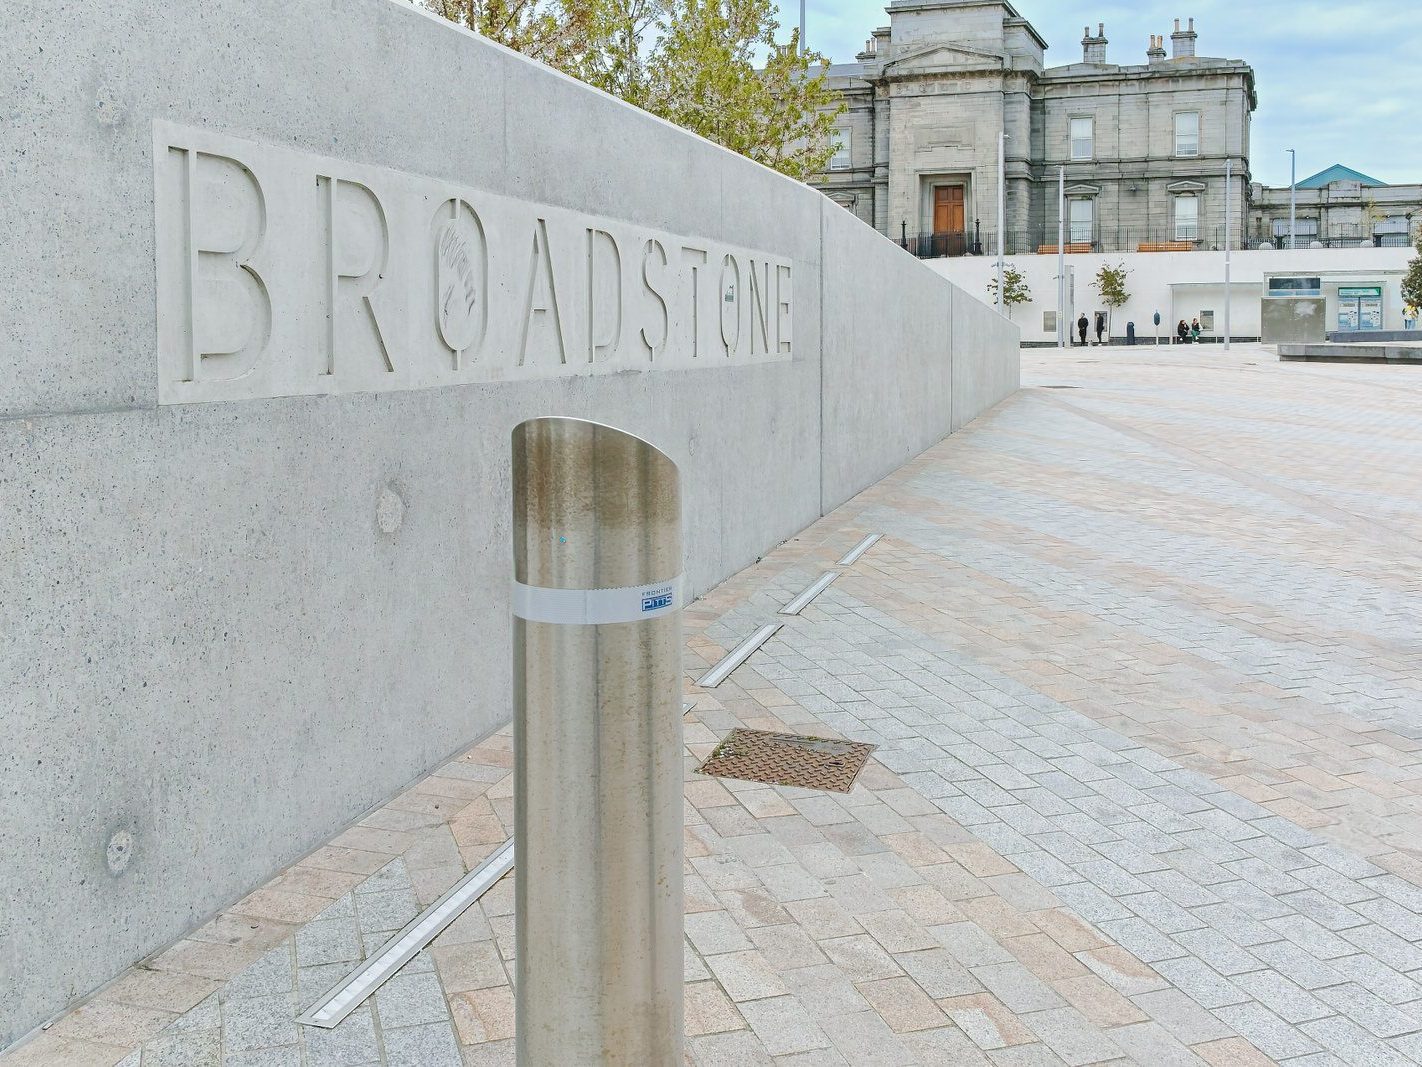 LUAS TRAM STOP AT BROADSTONE AND THE ENTRANCE TO GRANGEGORMAN UNIVERSITY CAMPUS 001